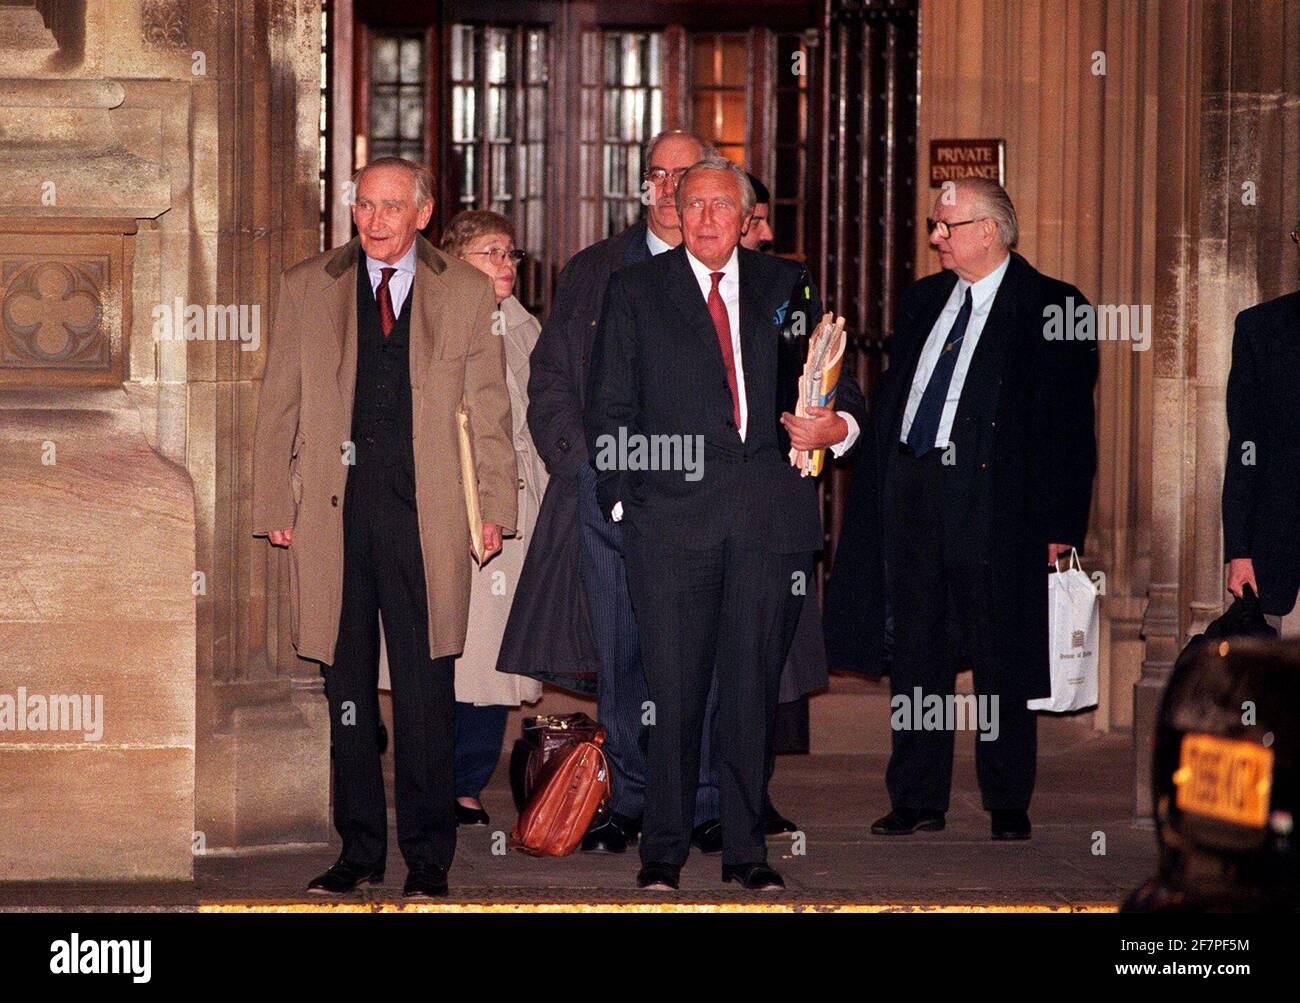 Lords January 2000 Lords leaving the House of Lords after the Governments Criminal Justice Mode Of Trial Bill was defeated - leaving through private entrance Stock Photo